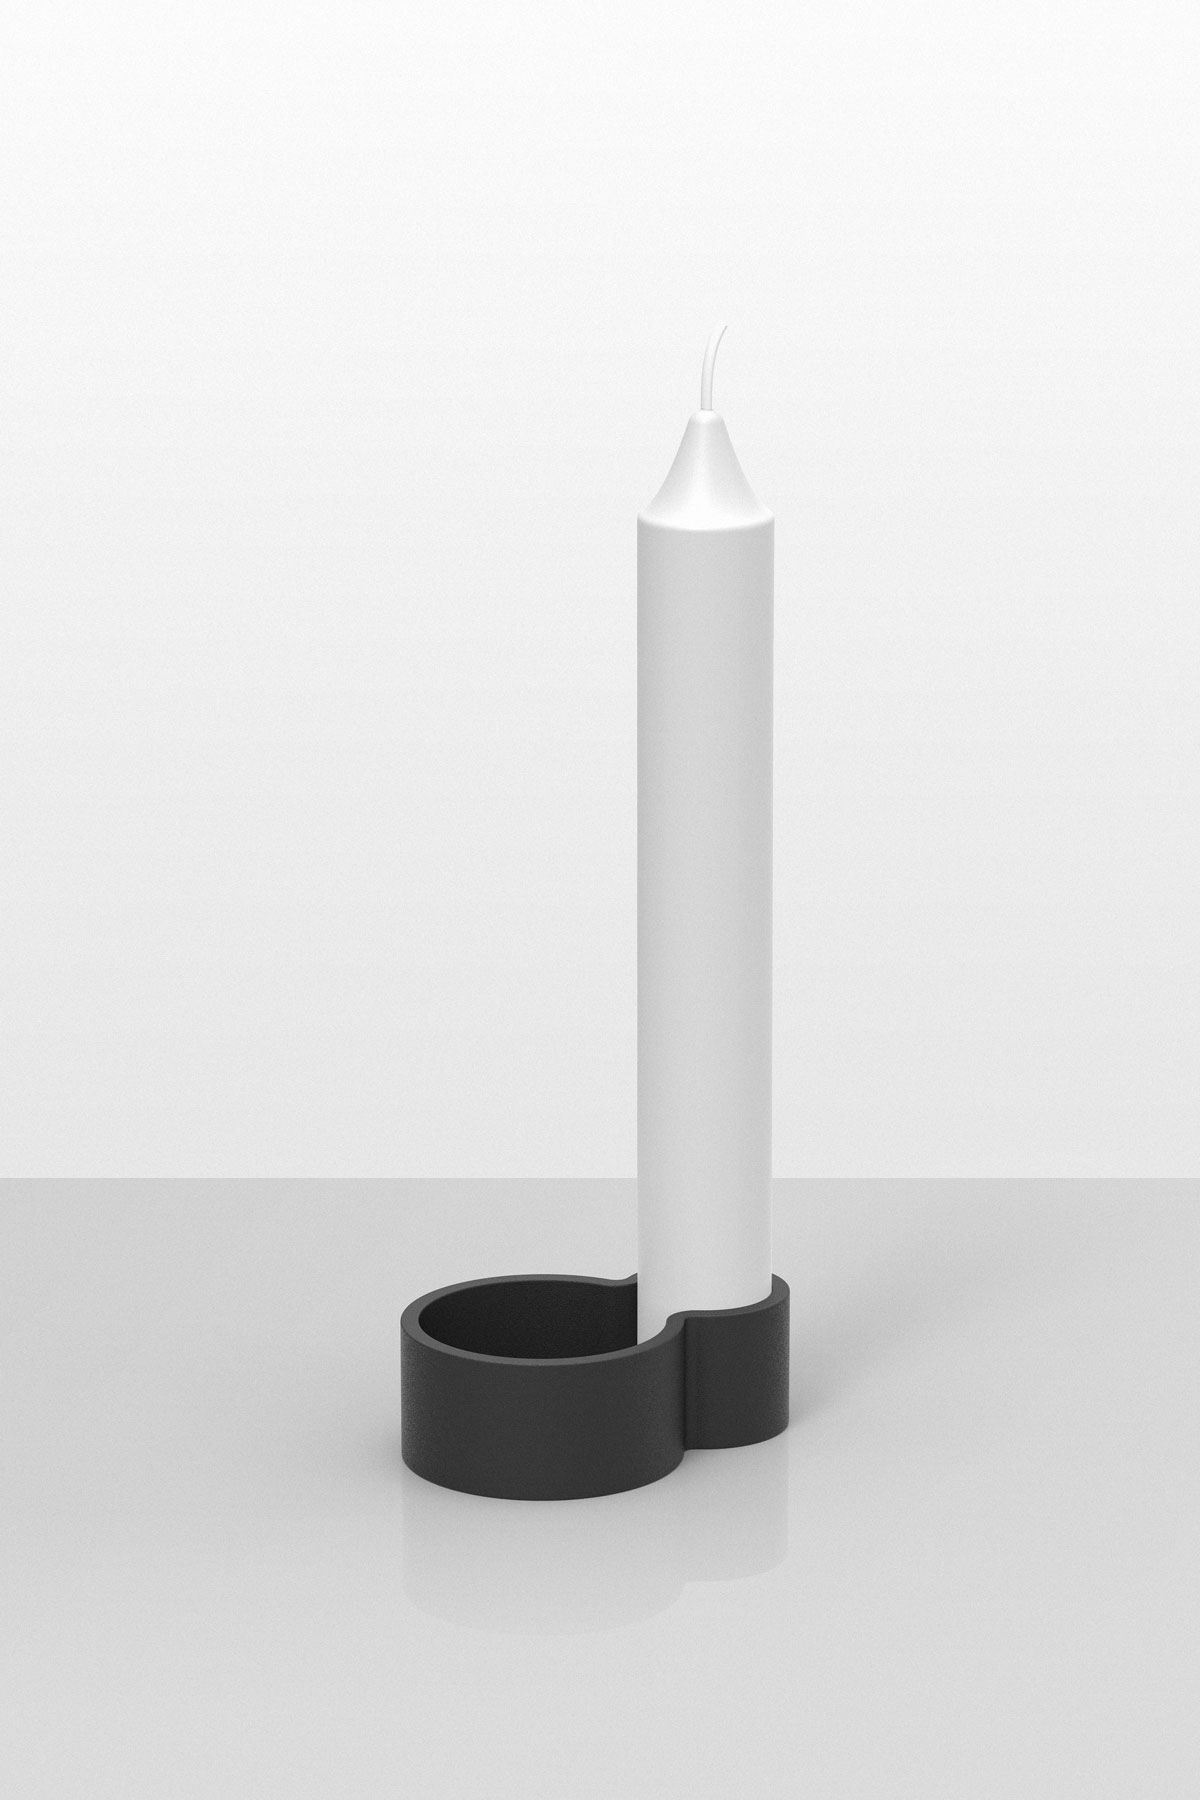 LOOP Candle Holder by Quentin de Coster